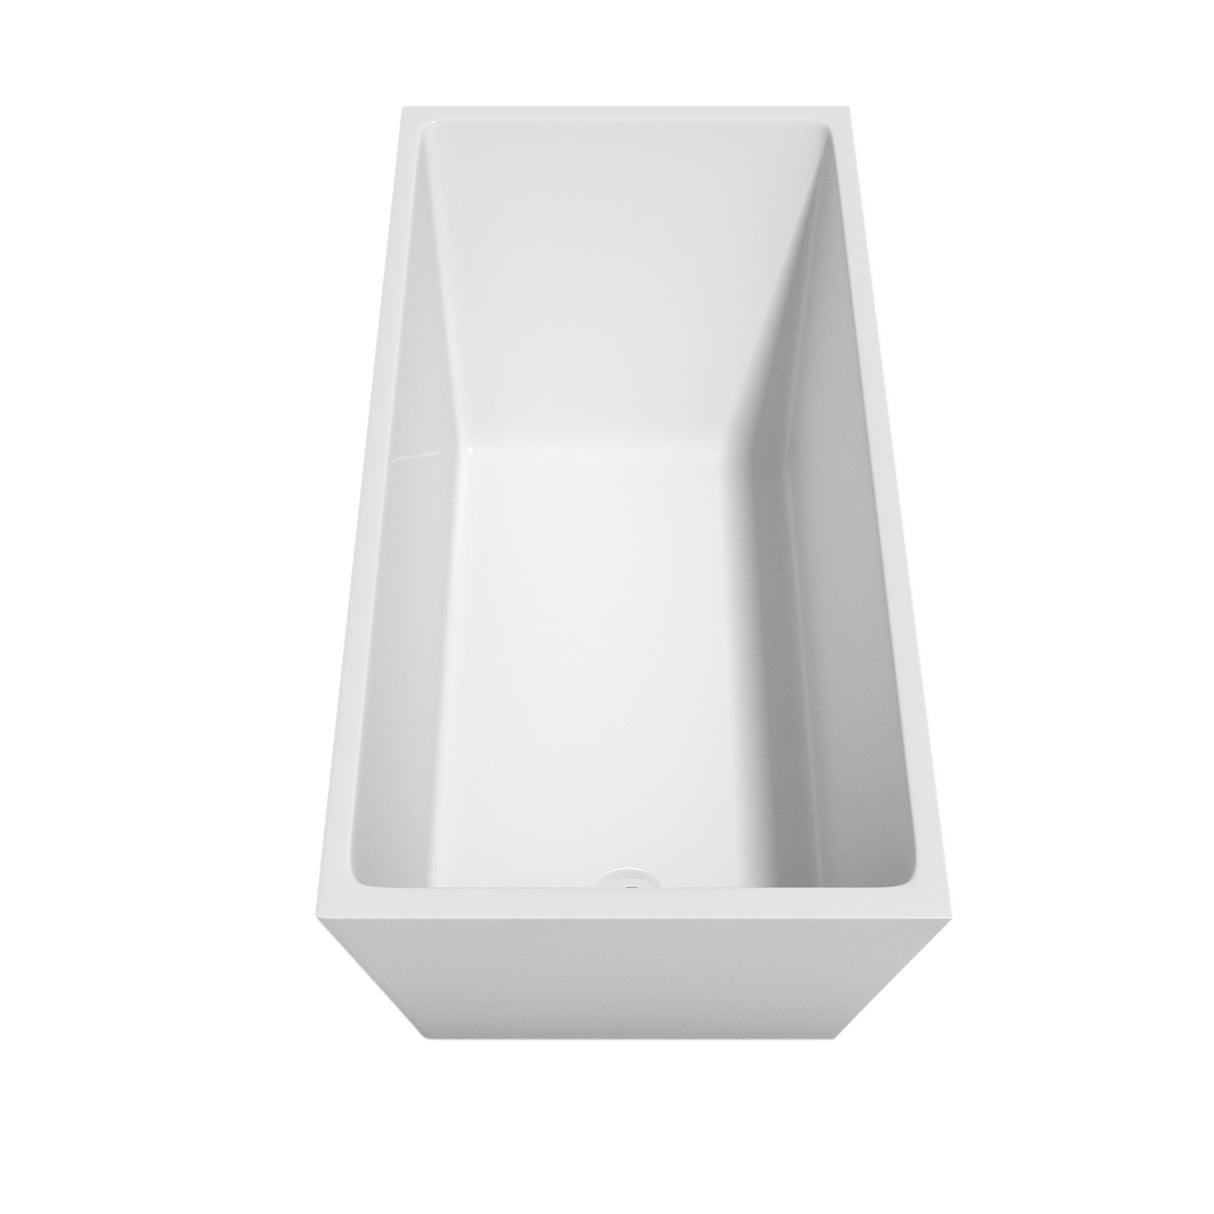 Hannah 59 Inch Freestanding Bathtub in White with Shiny White Drain and Overflow Trim